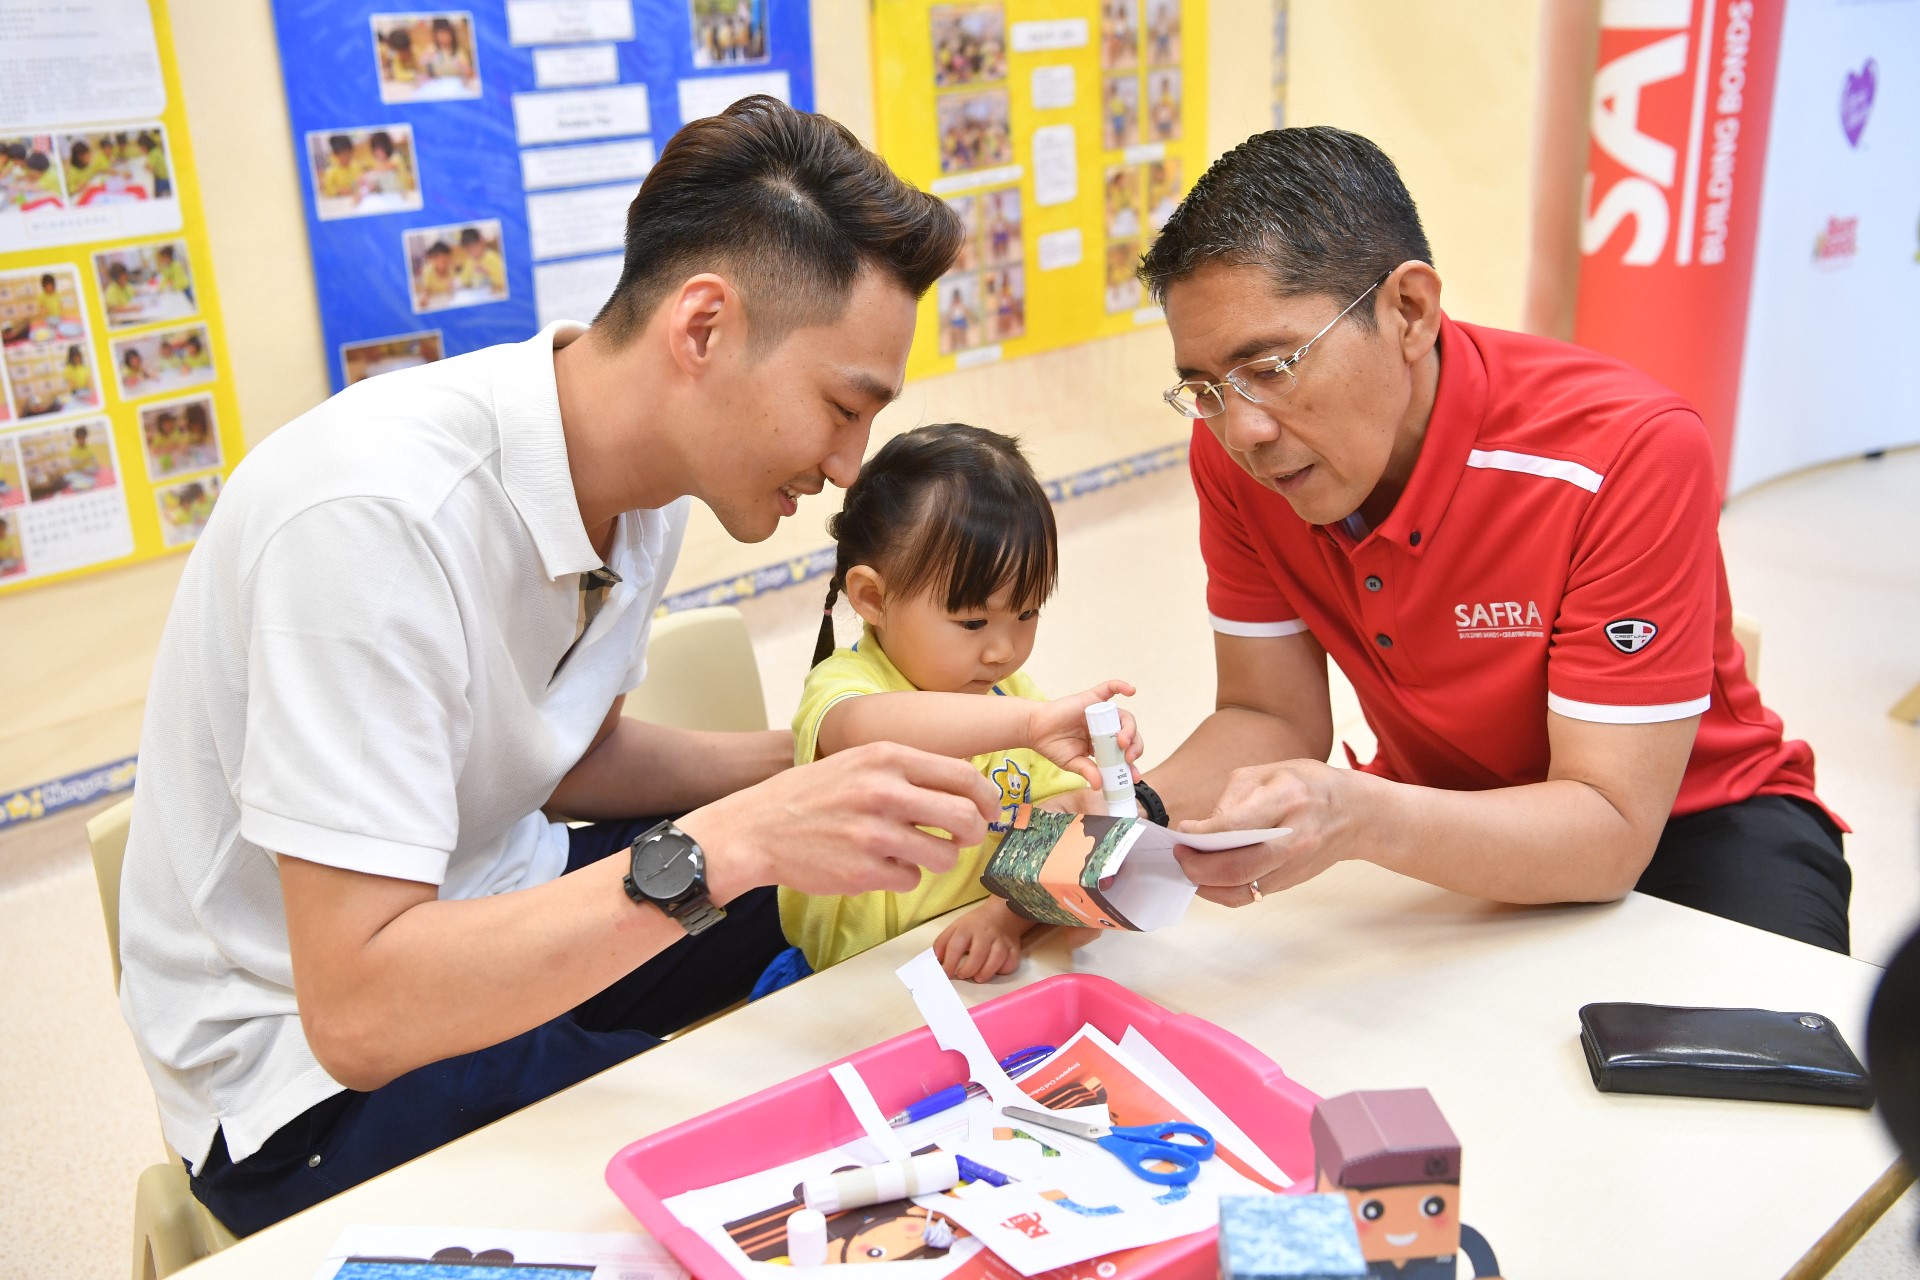 Papercraft messages from pre-schoolers, SAF Day deals to thank NSmen